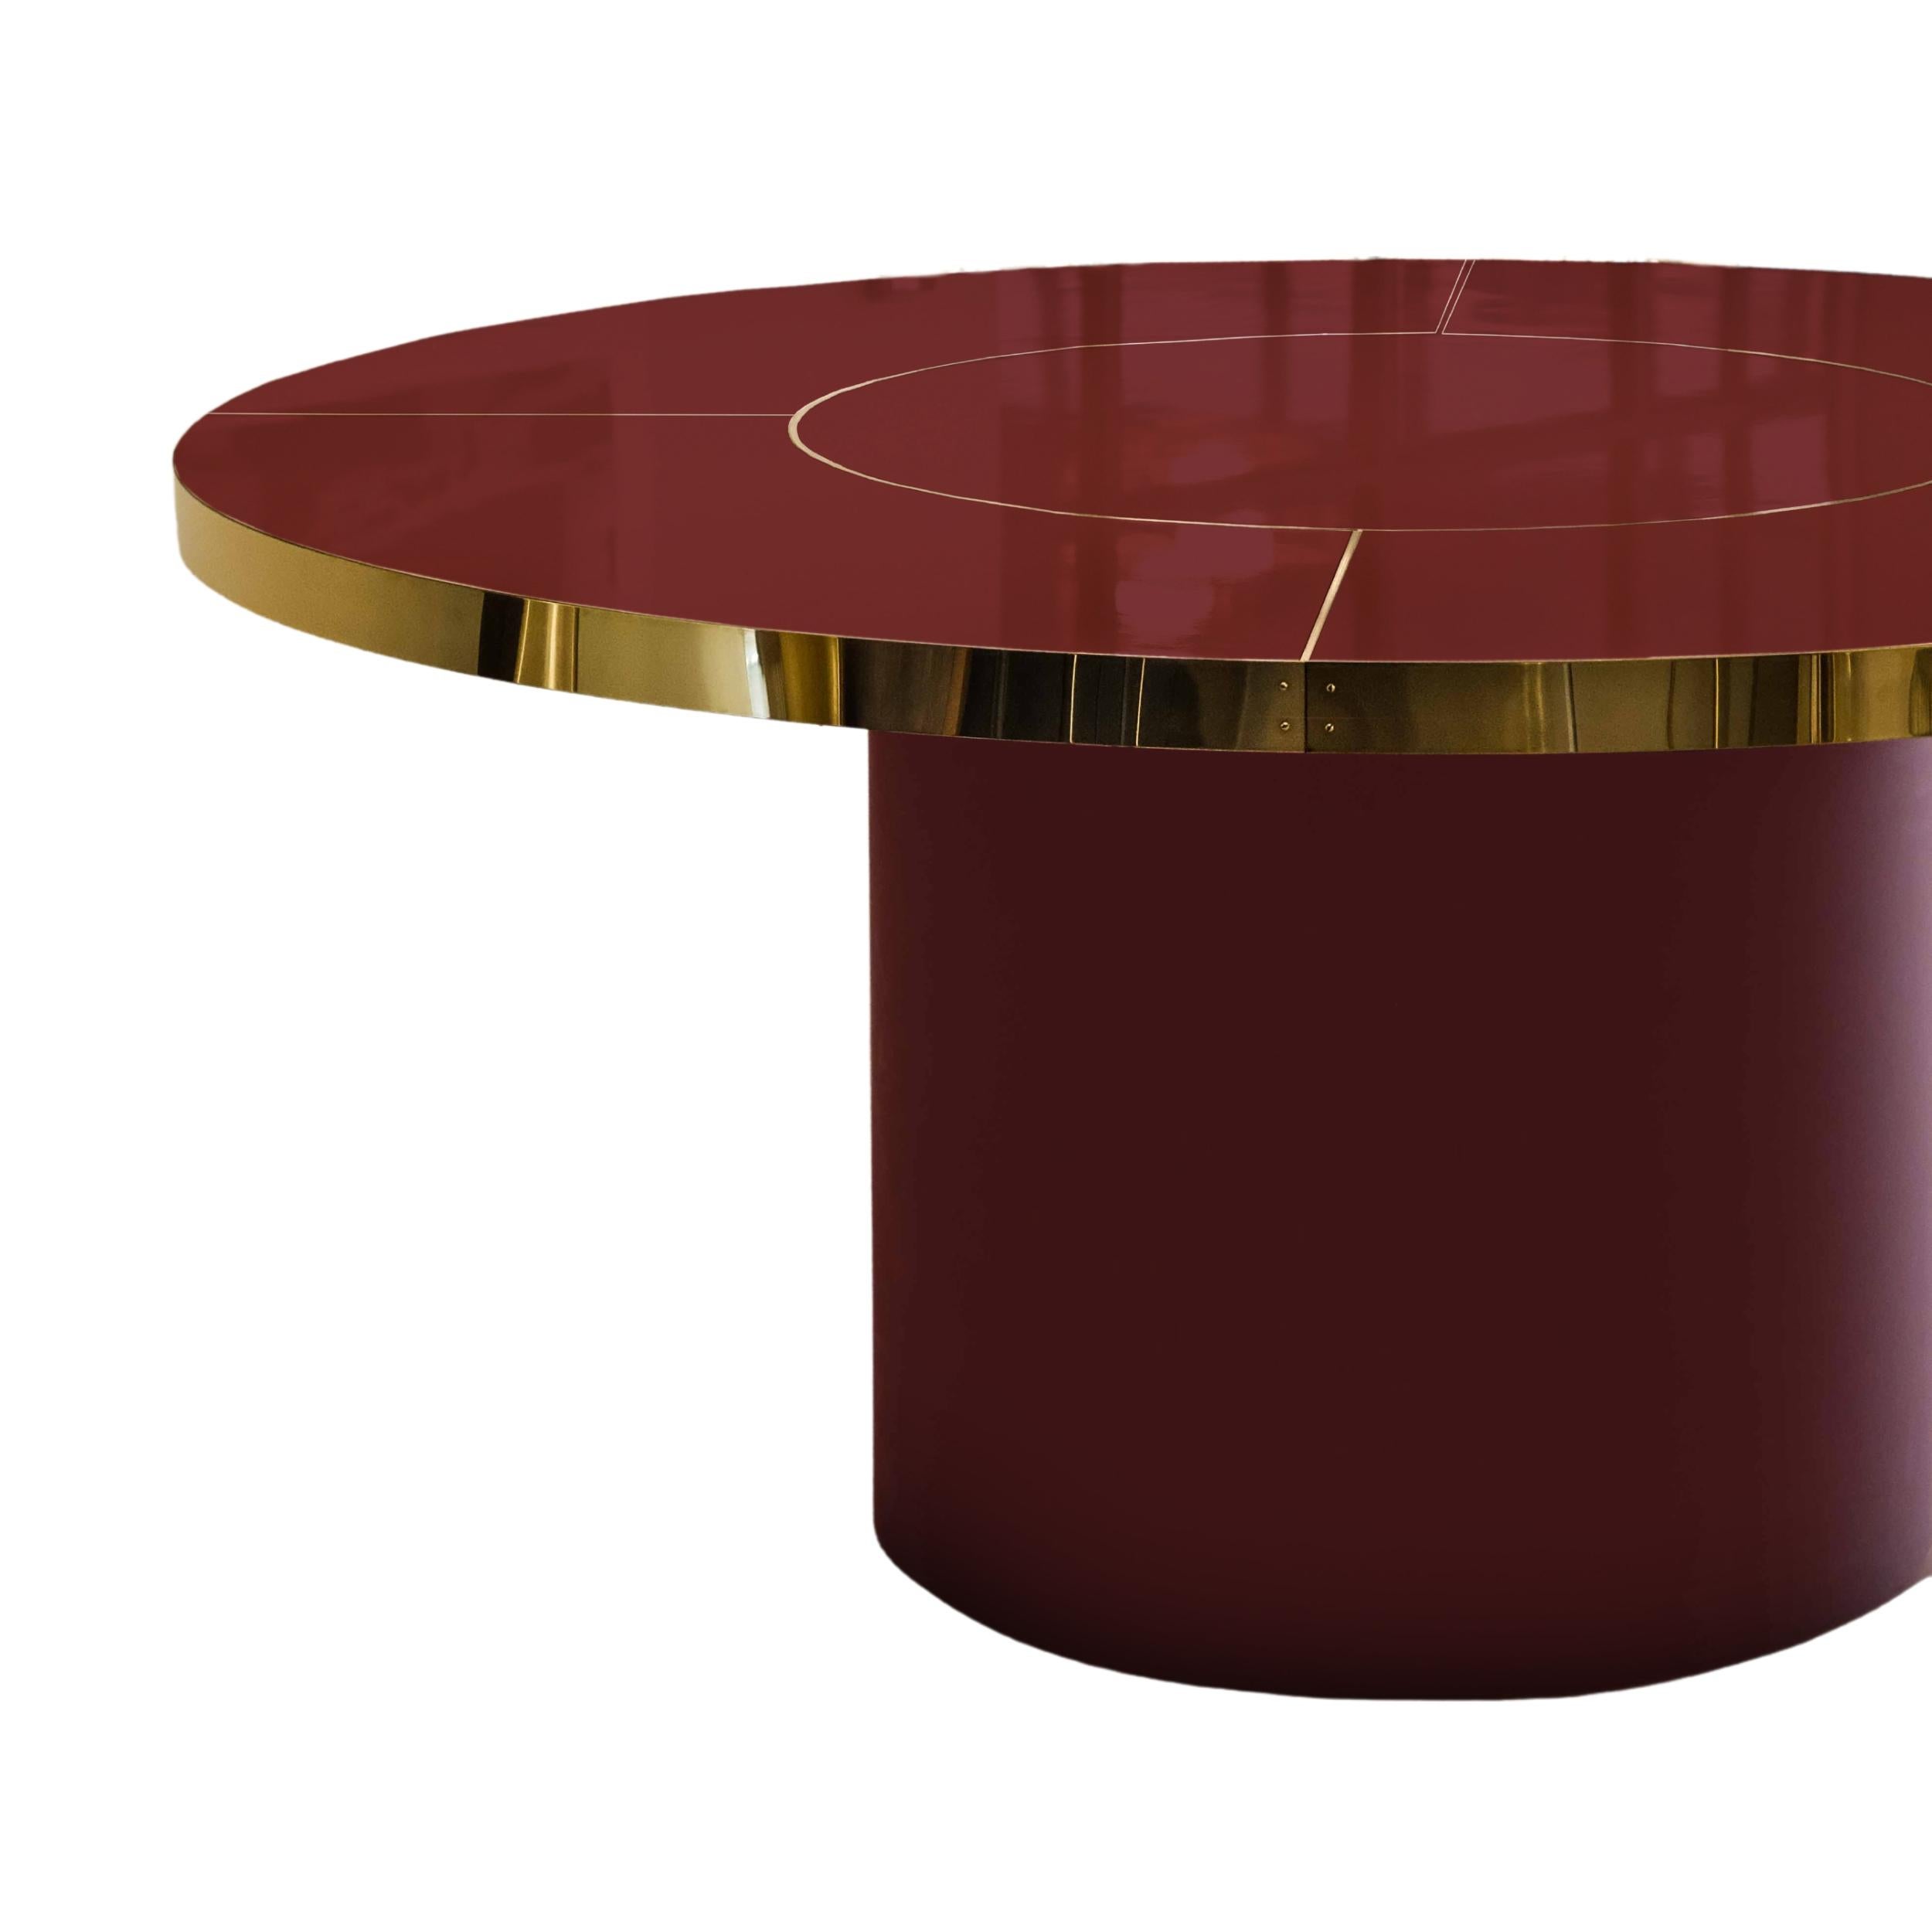 Retro Design Round Dining Table Palm Springs Style High Gloss Laminated & Satin Steel Details Extra Large Size

Discover our incredible collection of retro-style design tables inspired by the iconic decoration of the 1950s, 60s, and 70s of Palm